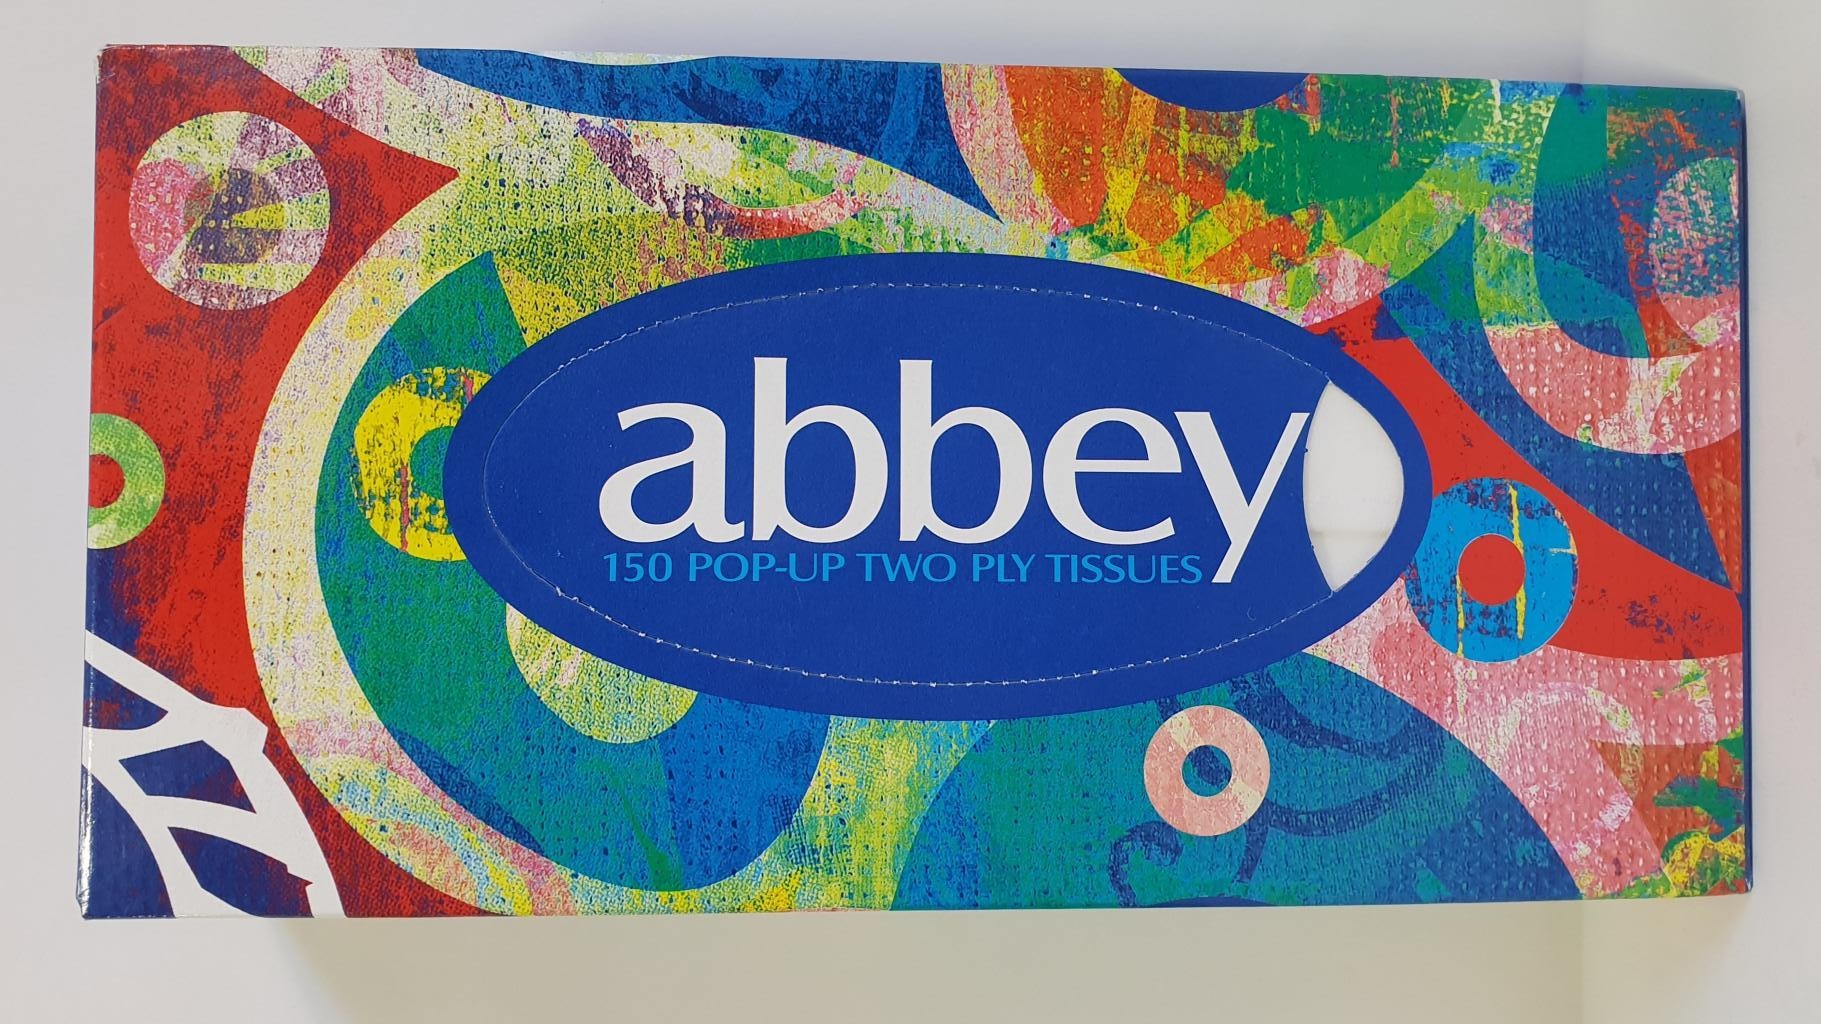 ABBEY POP UP TISSUES X150